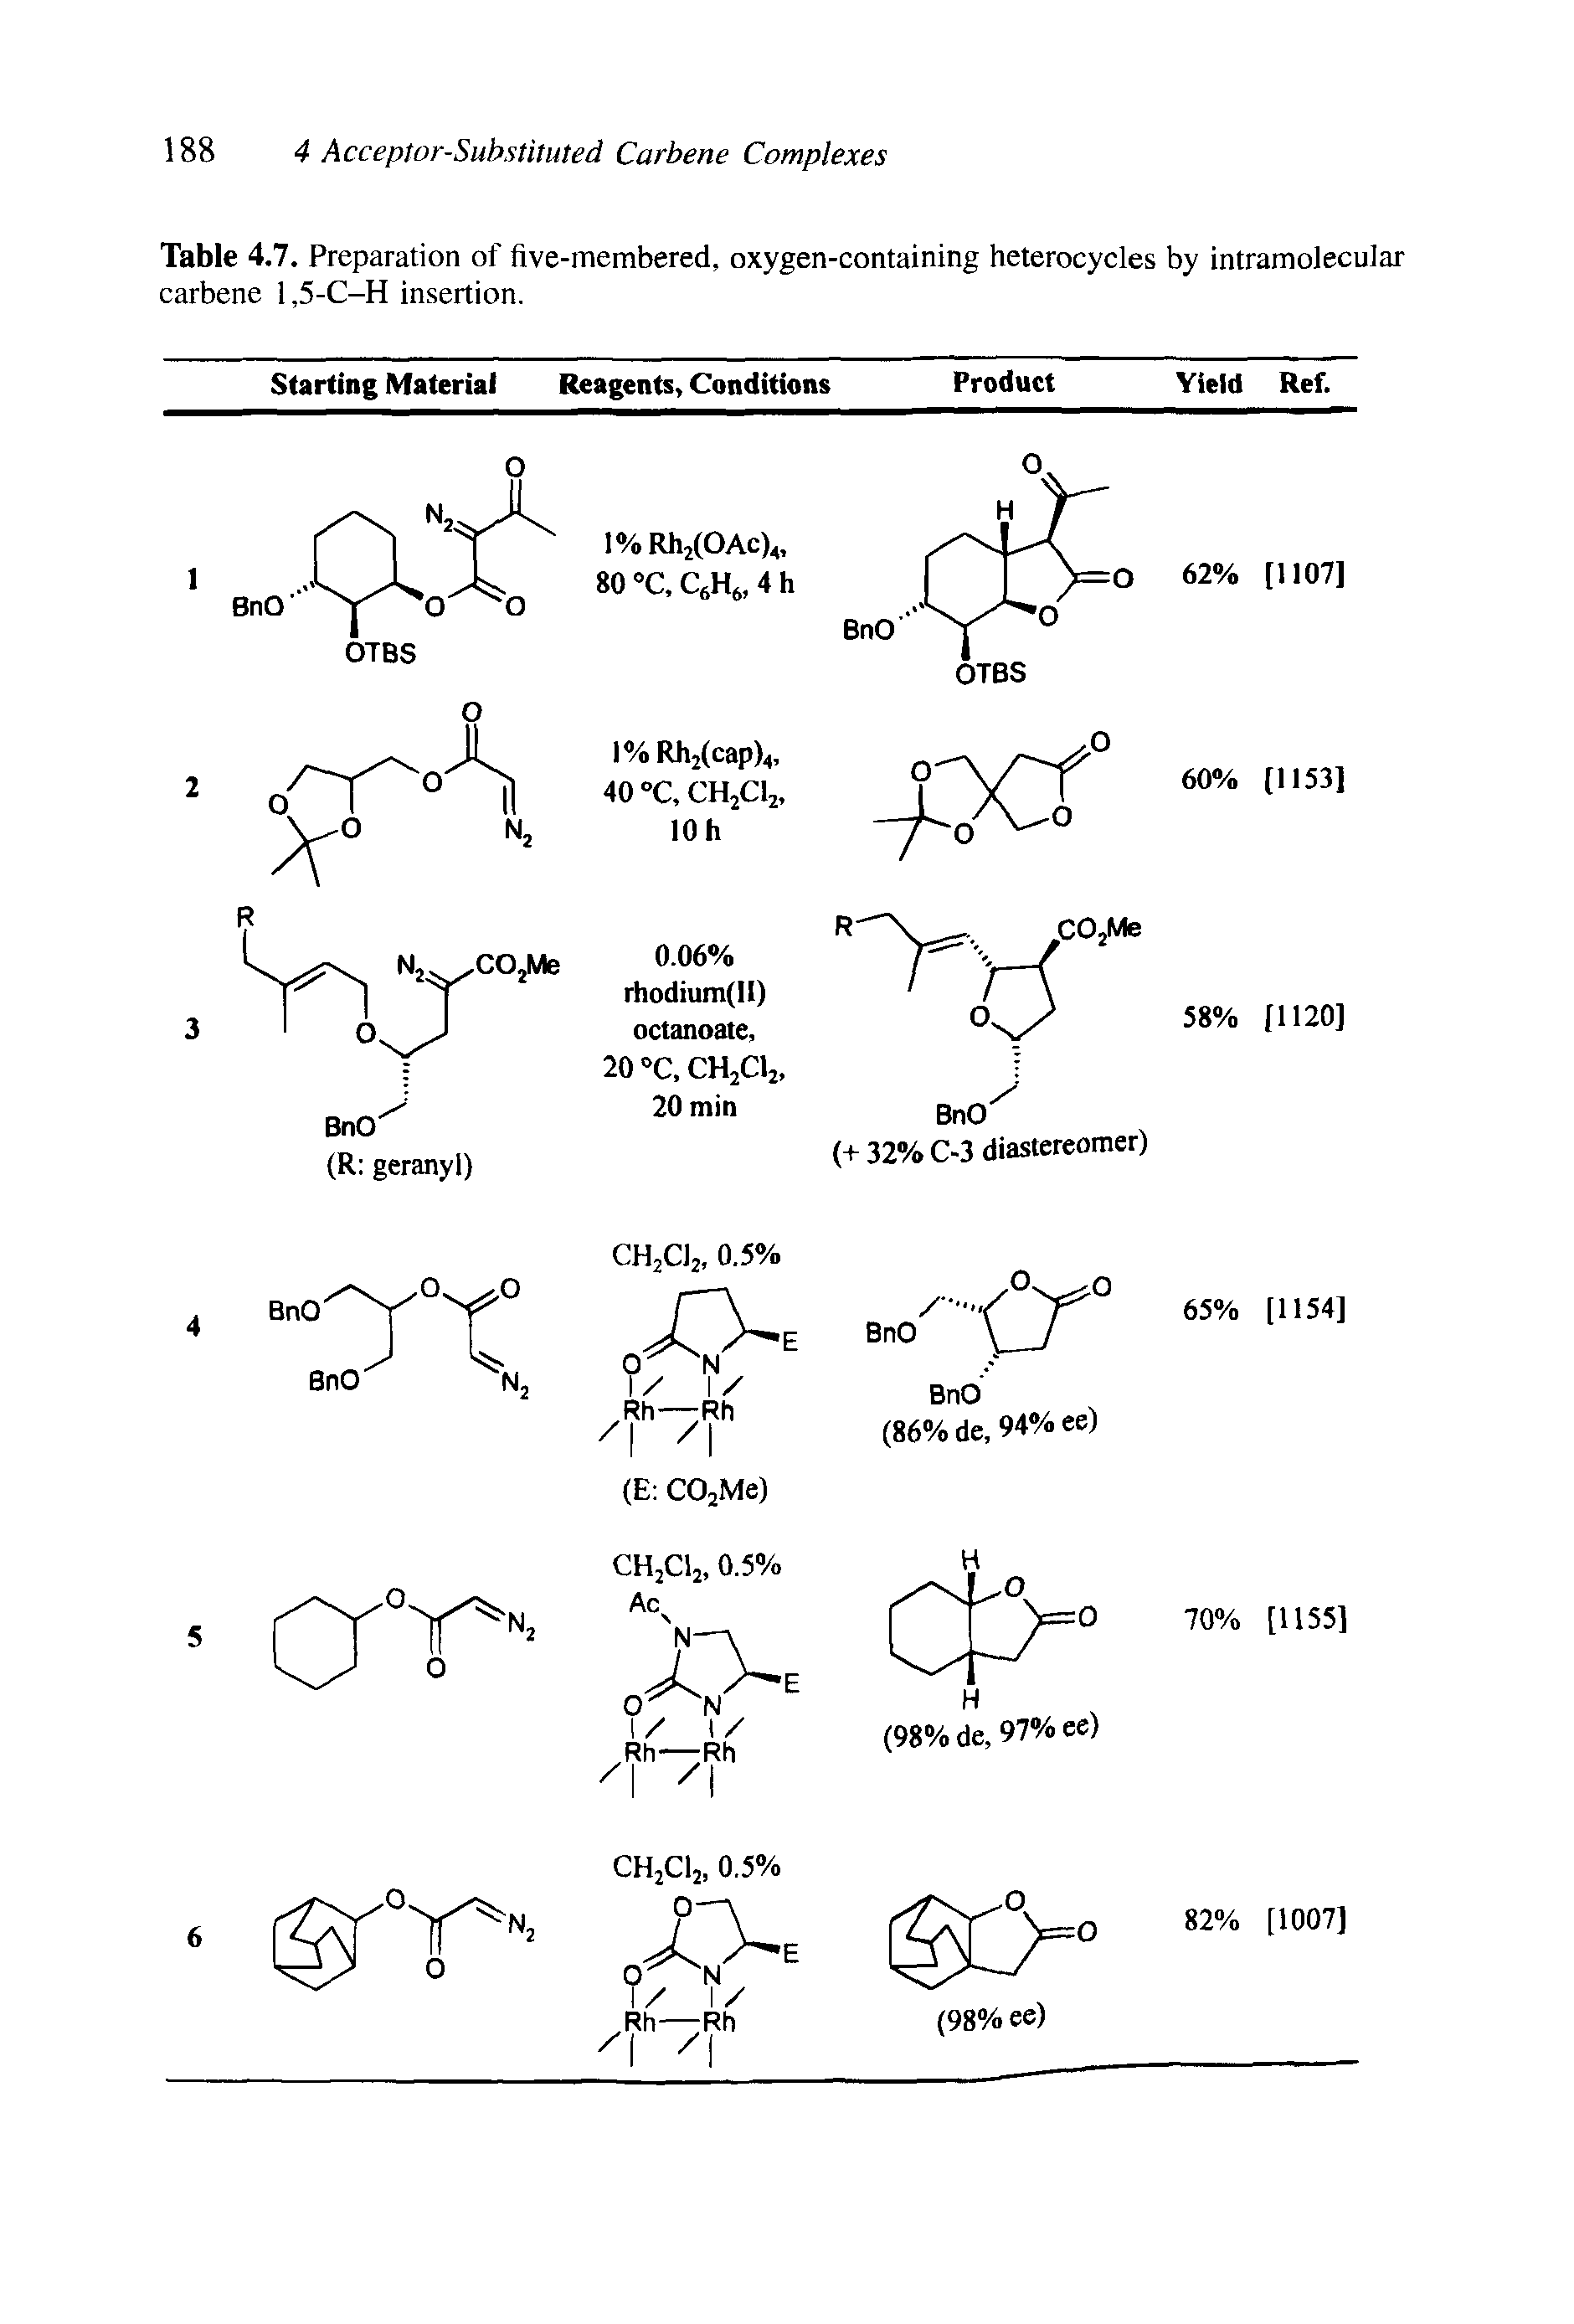 Table 4.7. Preparation of five-membered, oxygen-containing heterocycles by intramolecular carbene 1,5-C-H insertion.